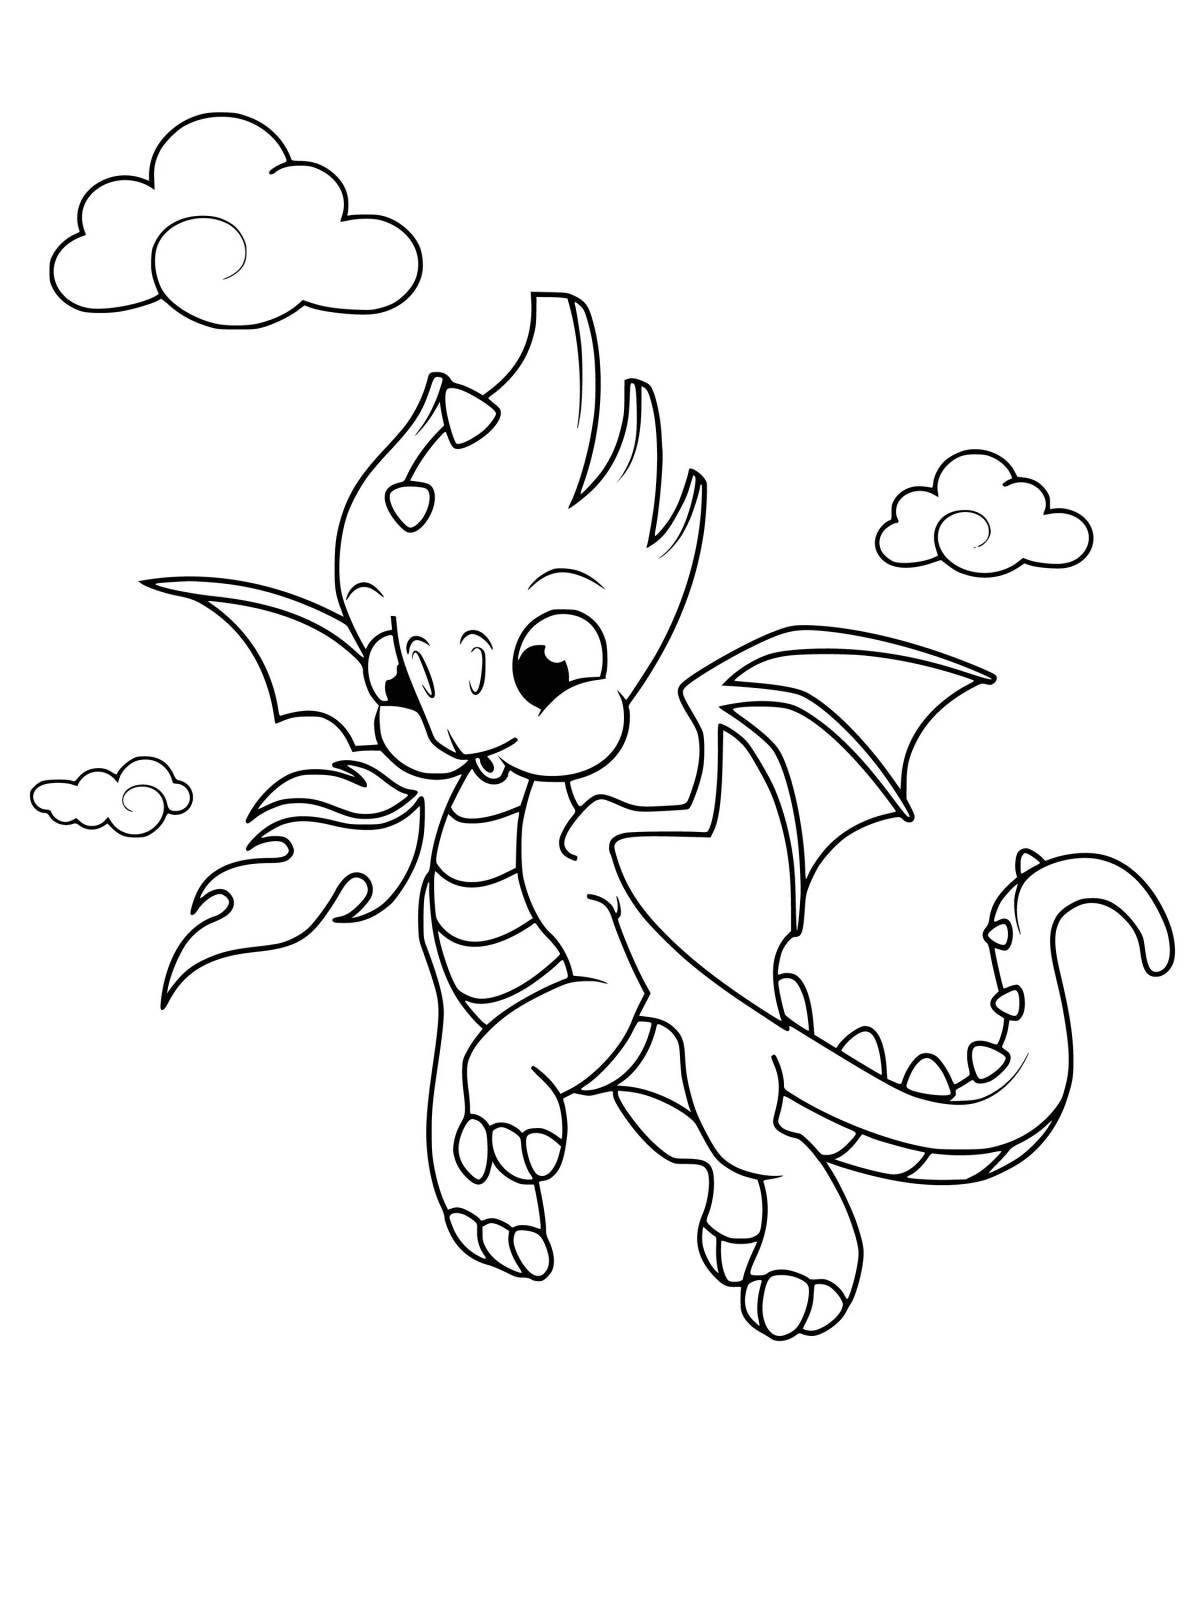 Gorgeous cute dragon coloring book